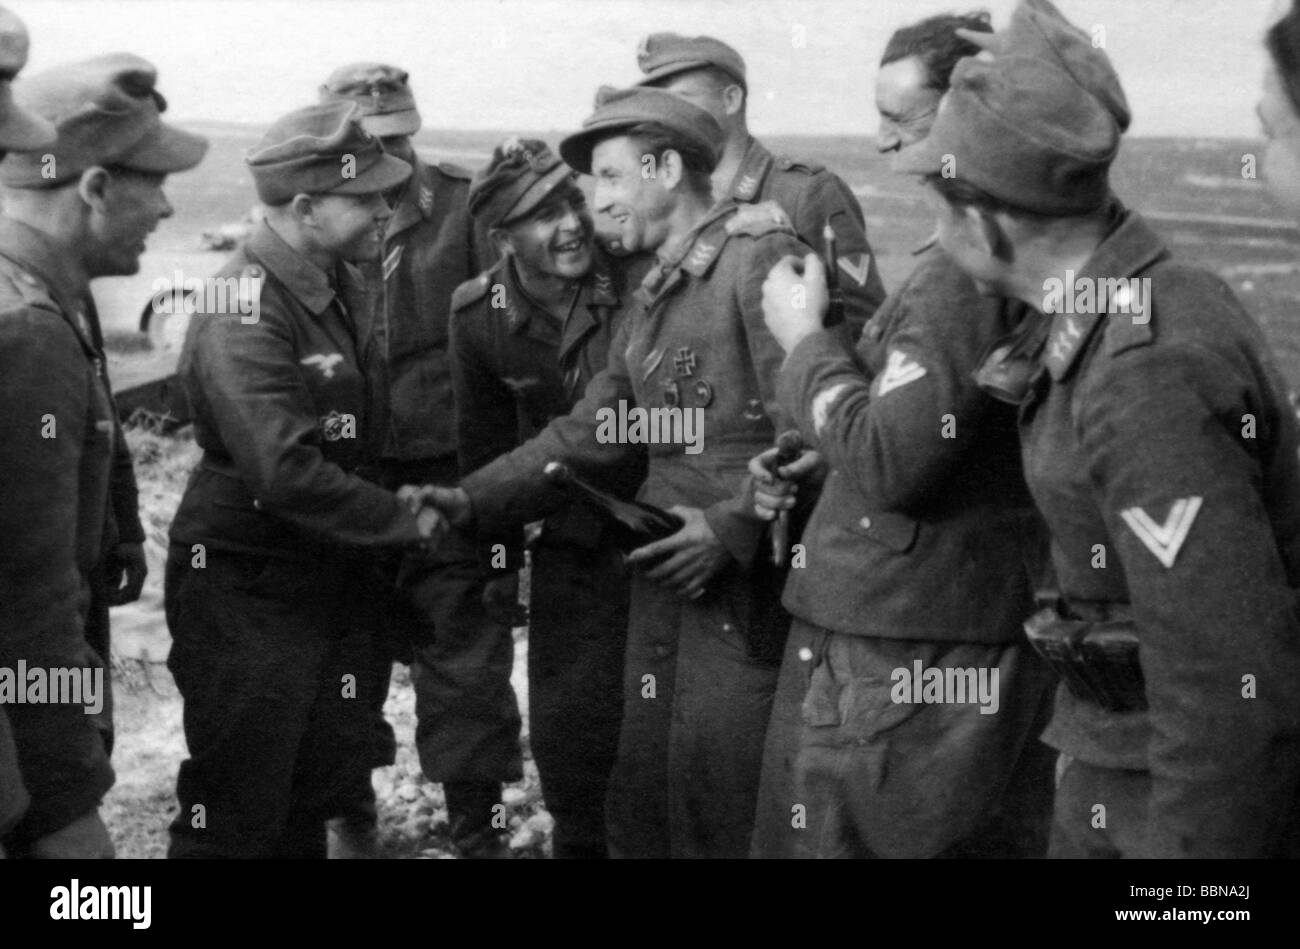 events, Second World War / WWII, Russia 1944 / 1945, Crimea, Sevastopol, soldiers of a Luftwaffe anti-aircraft unit congratulating a comrade on the award of a medal, 30.4.1944, Eastern Front, USSR, Wehrmacht, 20th century, historic, historical, Soviet Union, AA, joy, handshake, shaking hands, laughing, 1940s, people, Stock Photo